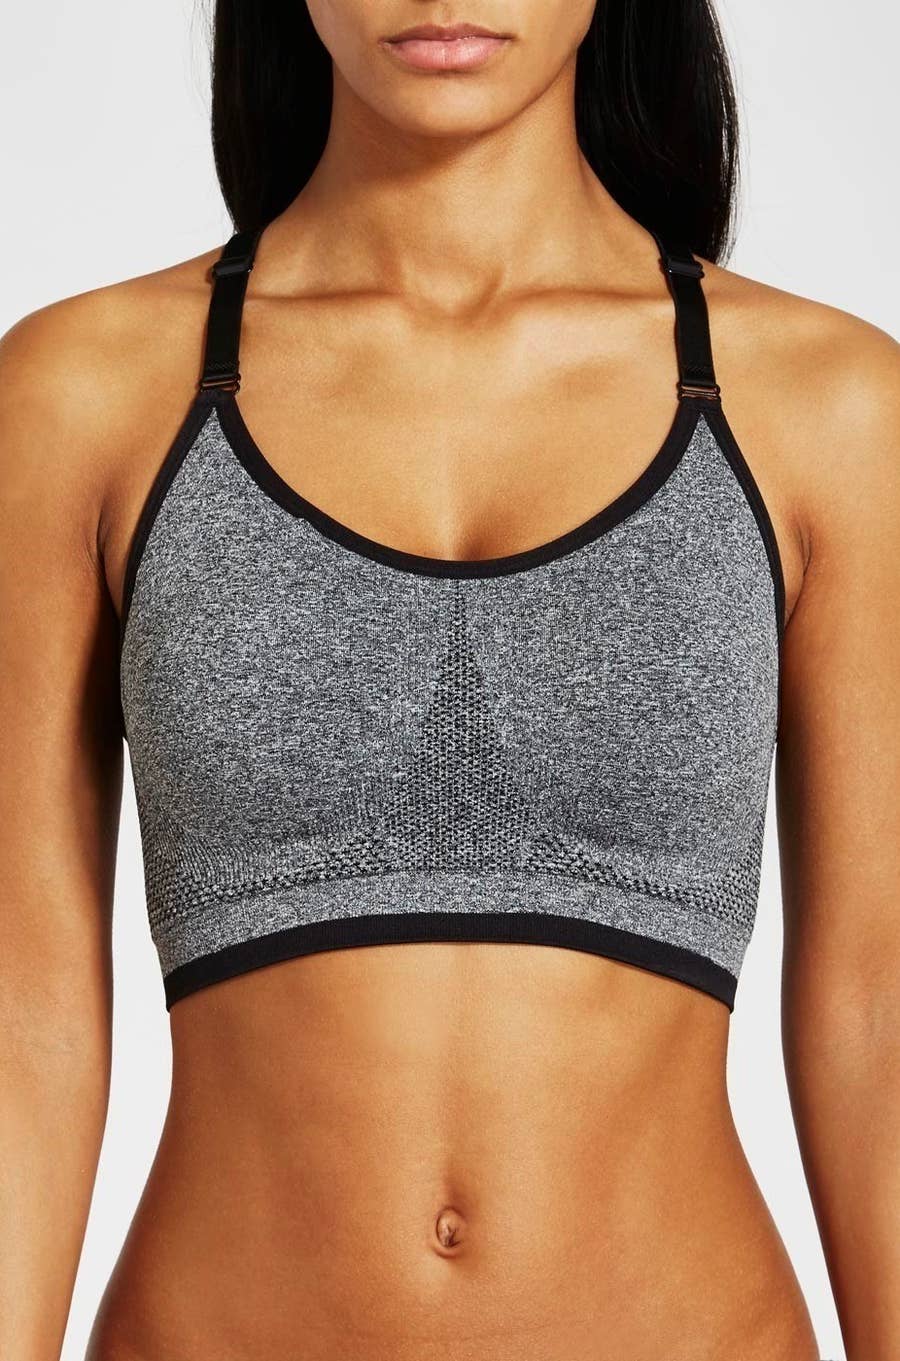 17 Places To Buy Workout Clothes That Are Cute And Affordable